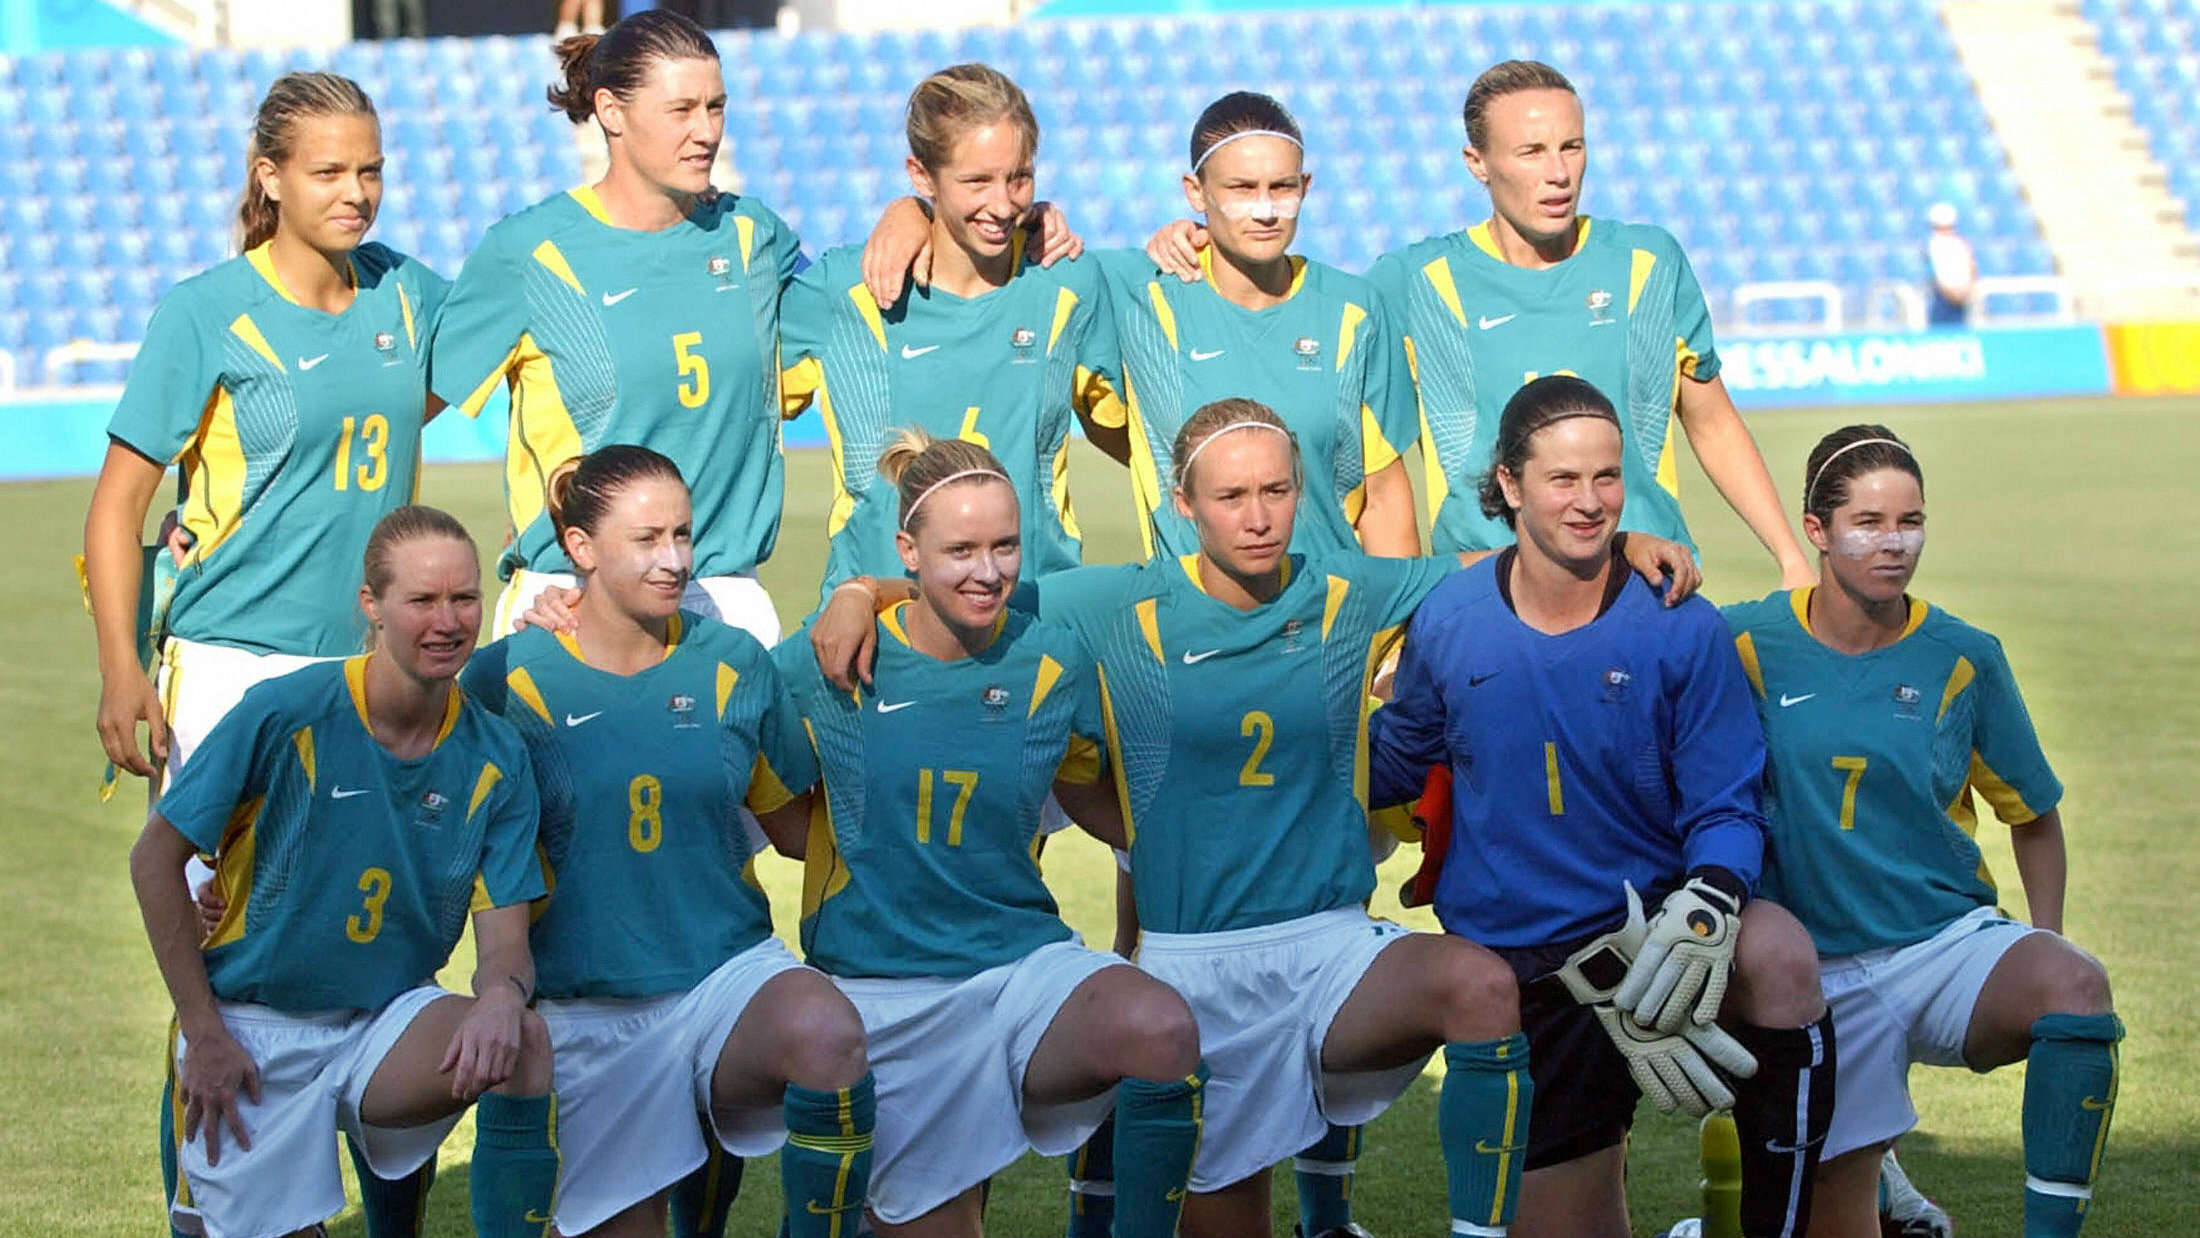 The Westfield Matildas pose for a team photo at the 2004 Athens Olympics.